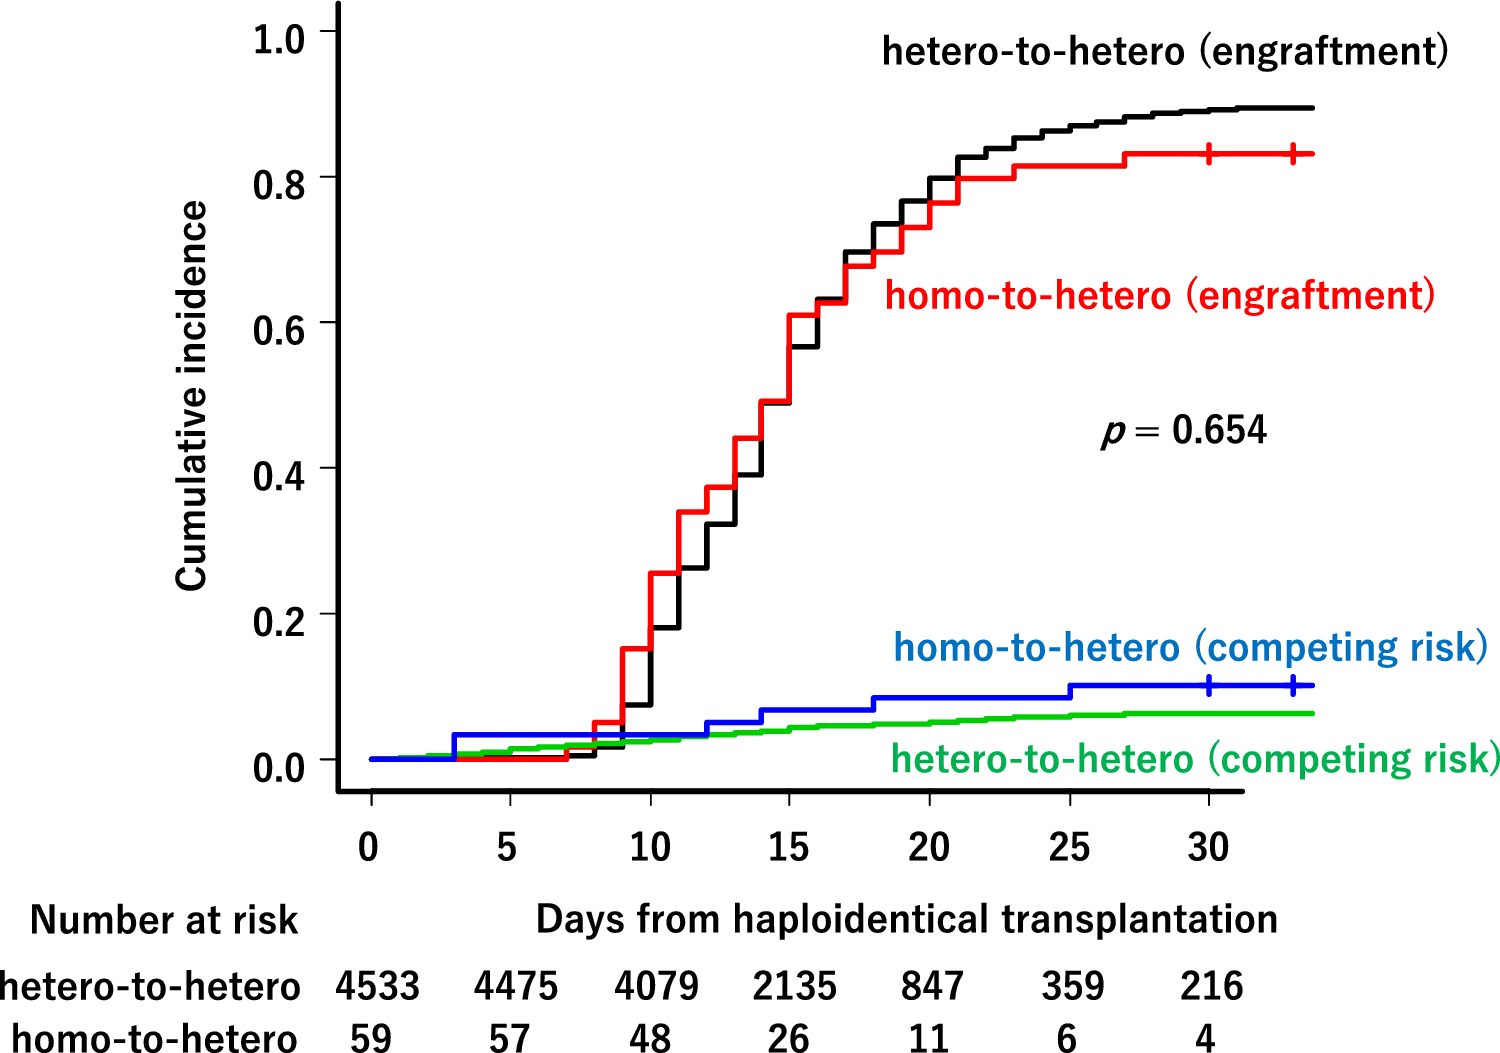 HLA haploidentical stem cell transplantation from HLA homozygous donors to HLA heterozygous donors may have lower survival rates than haploidentical transplantation from HLA heterozygous donors to HLA heterozygous donors: a retrospective nationwide analysis